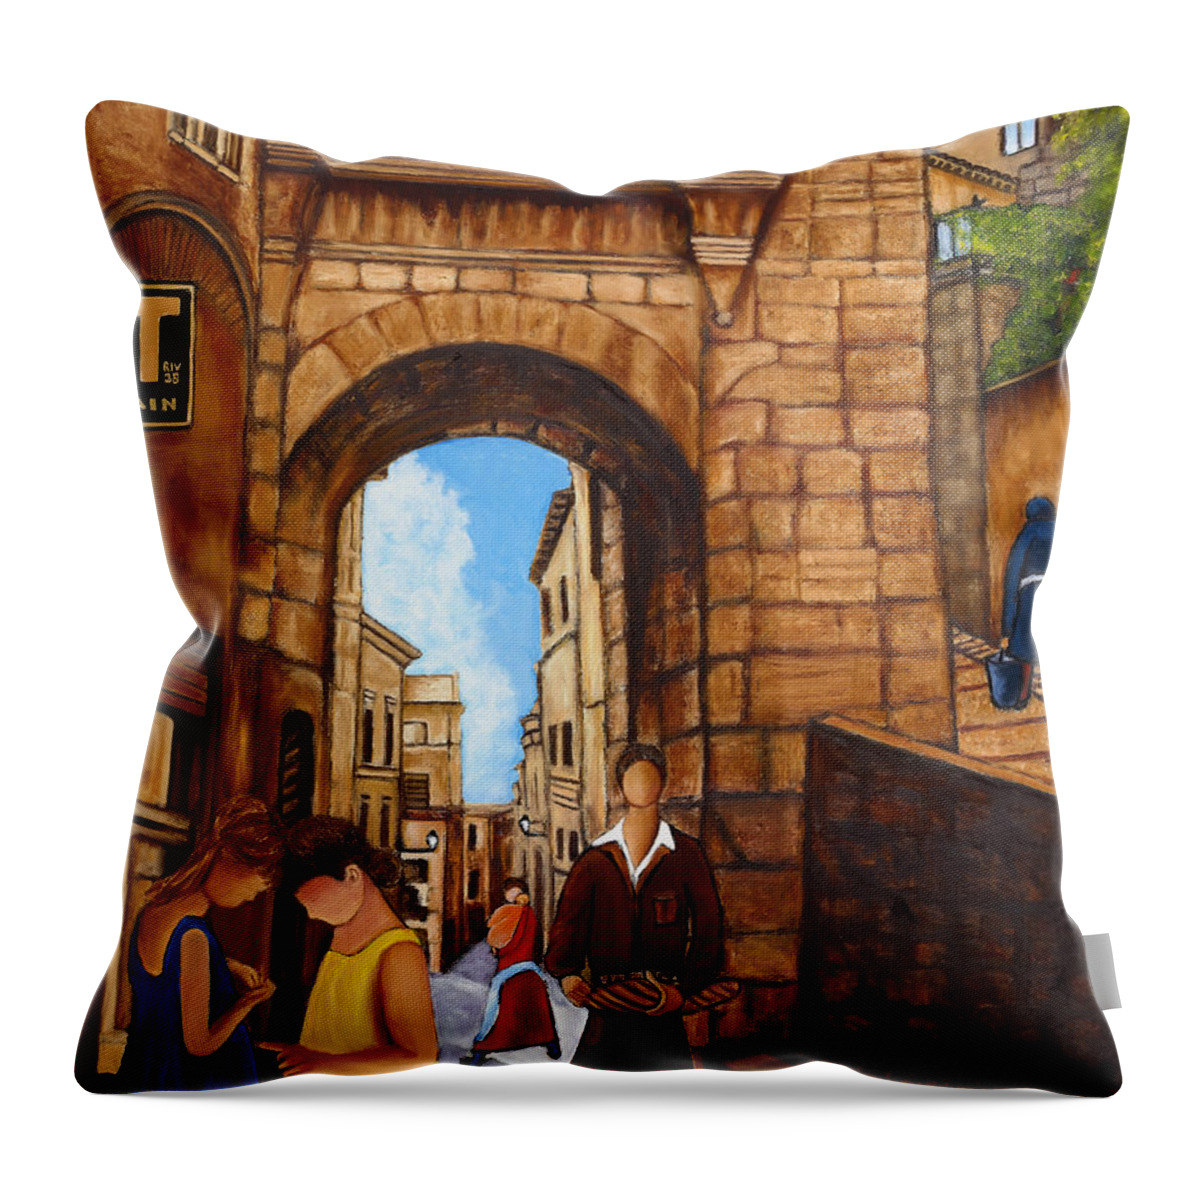 Frenchtown Throw Pillow featuring the painting Boy With Bread by William Cain